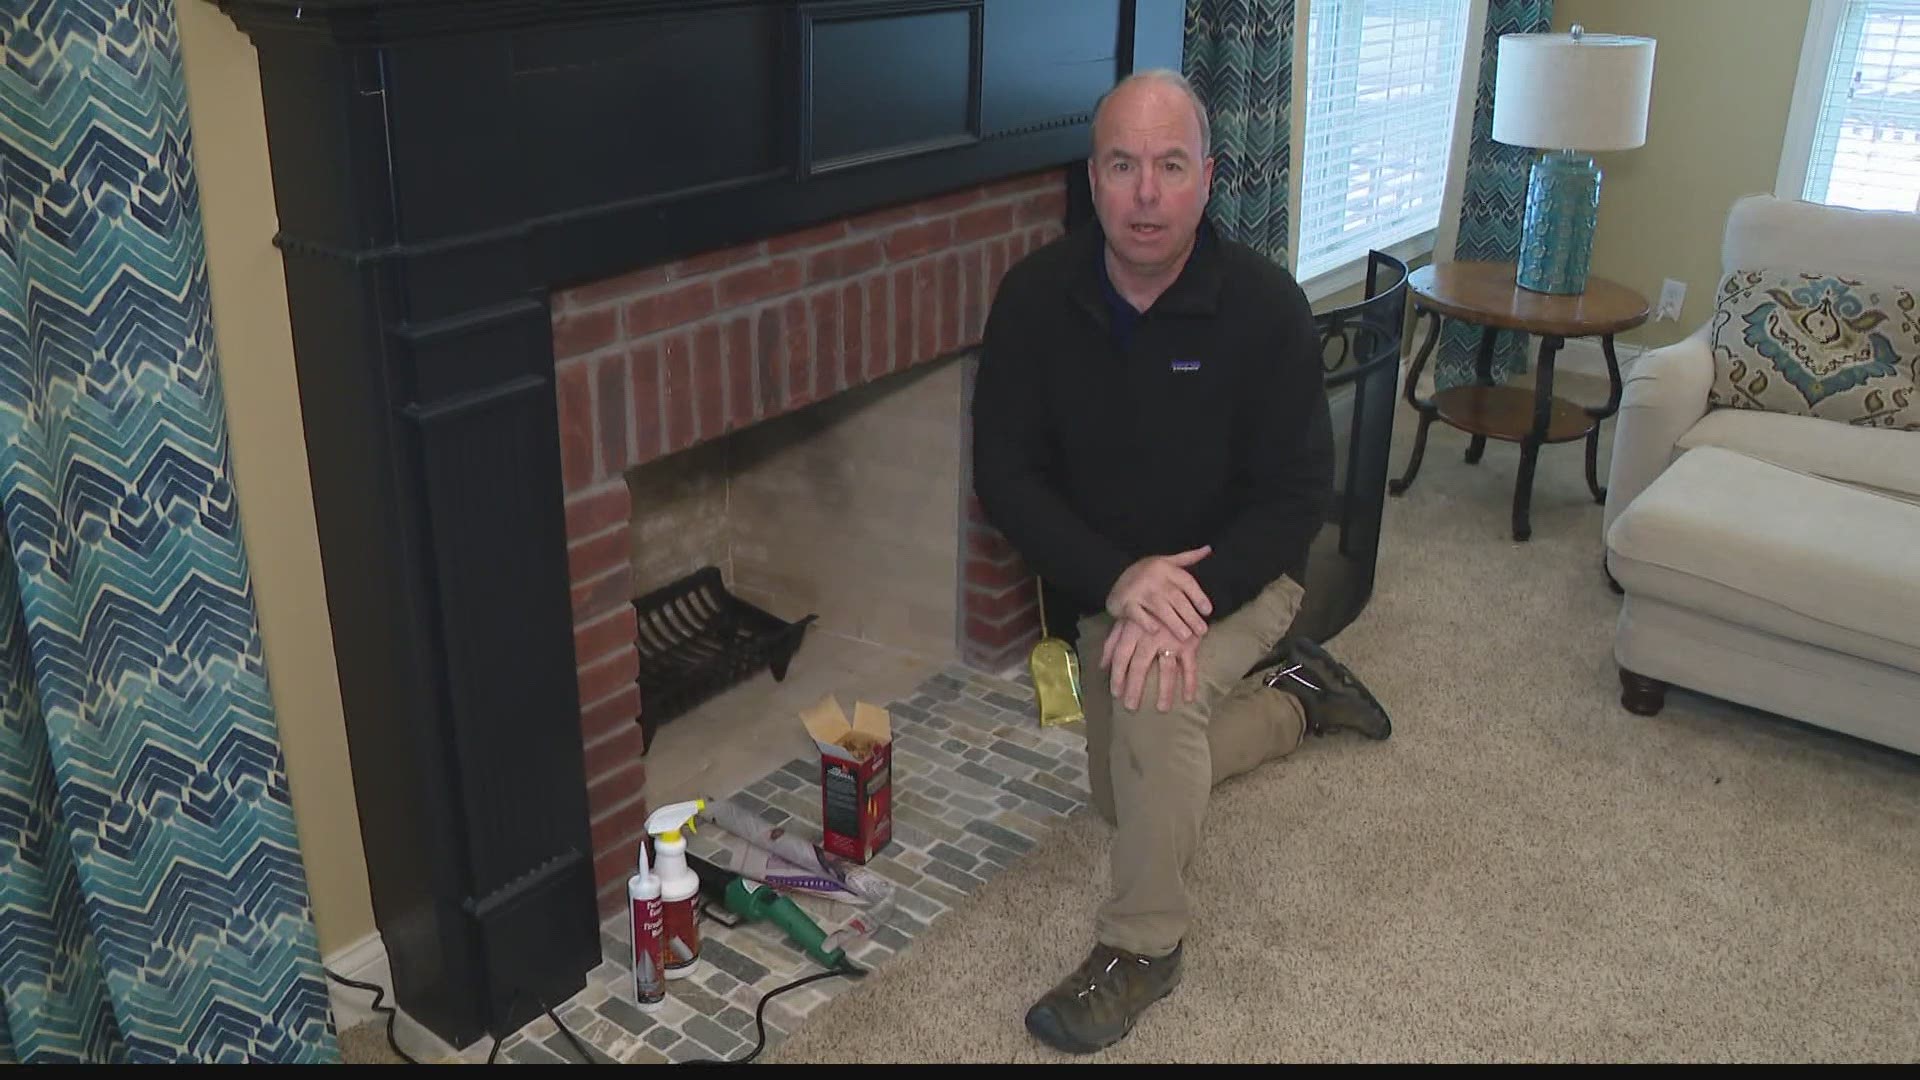 Pat explains how to enjoy a safe, warm fire in your fireplace.